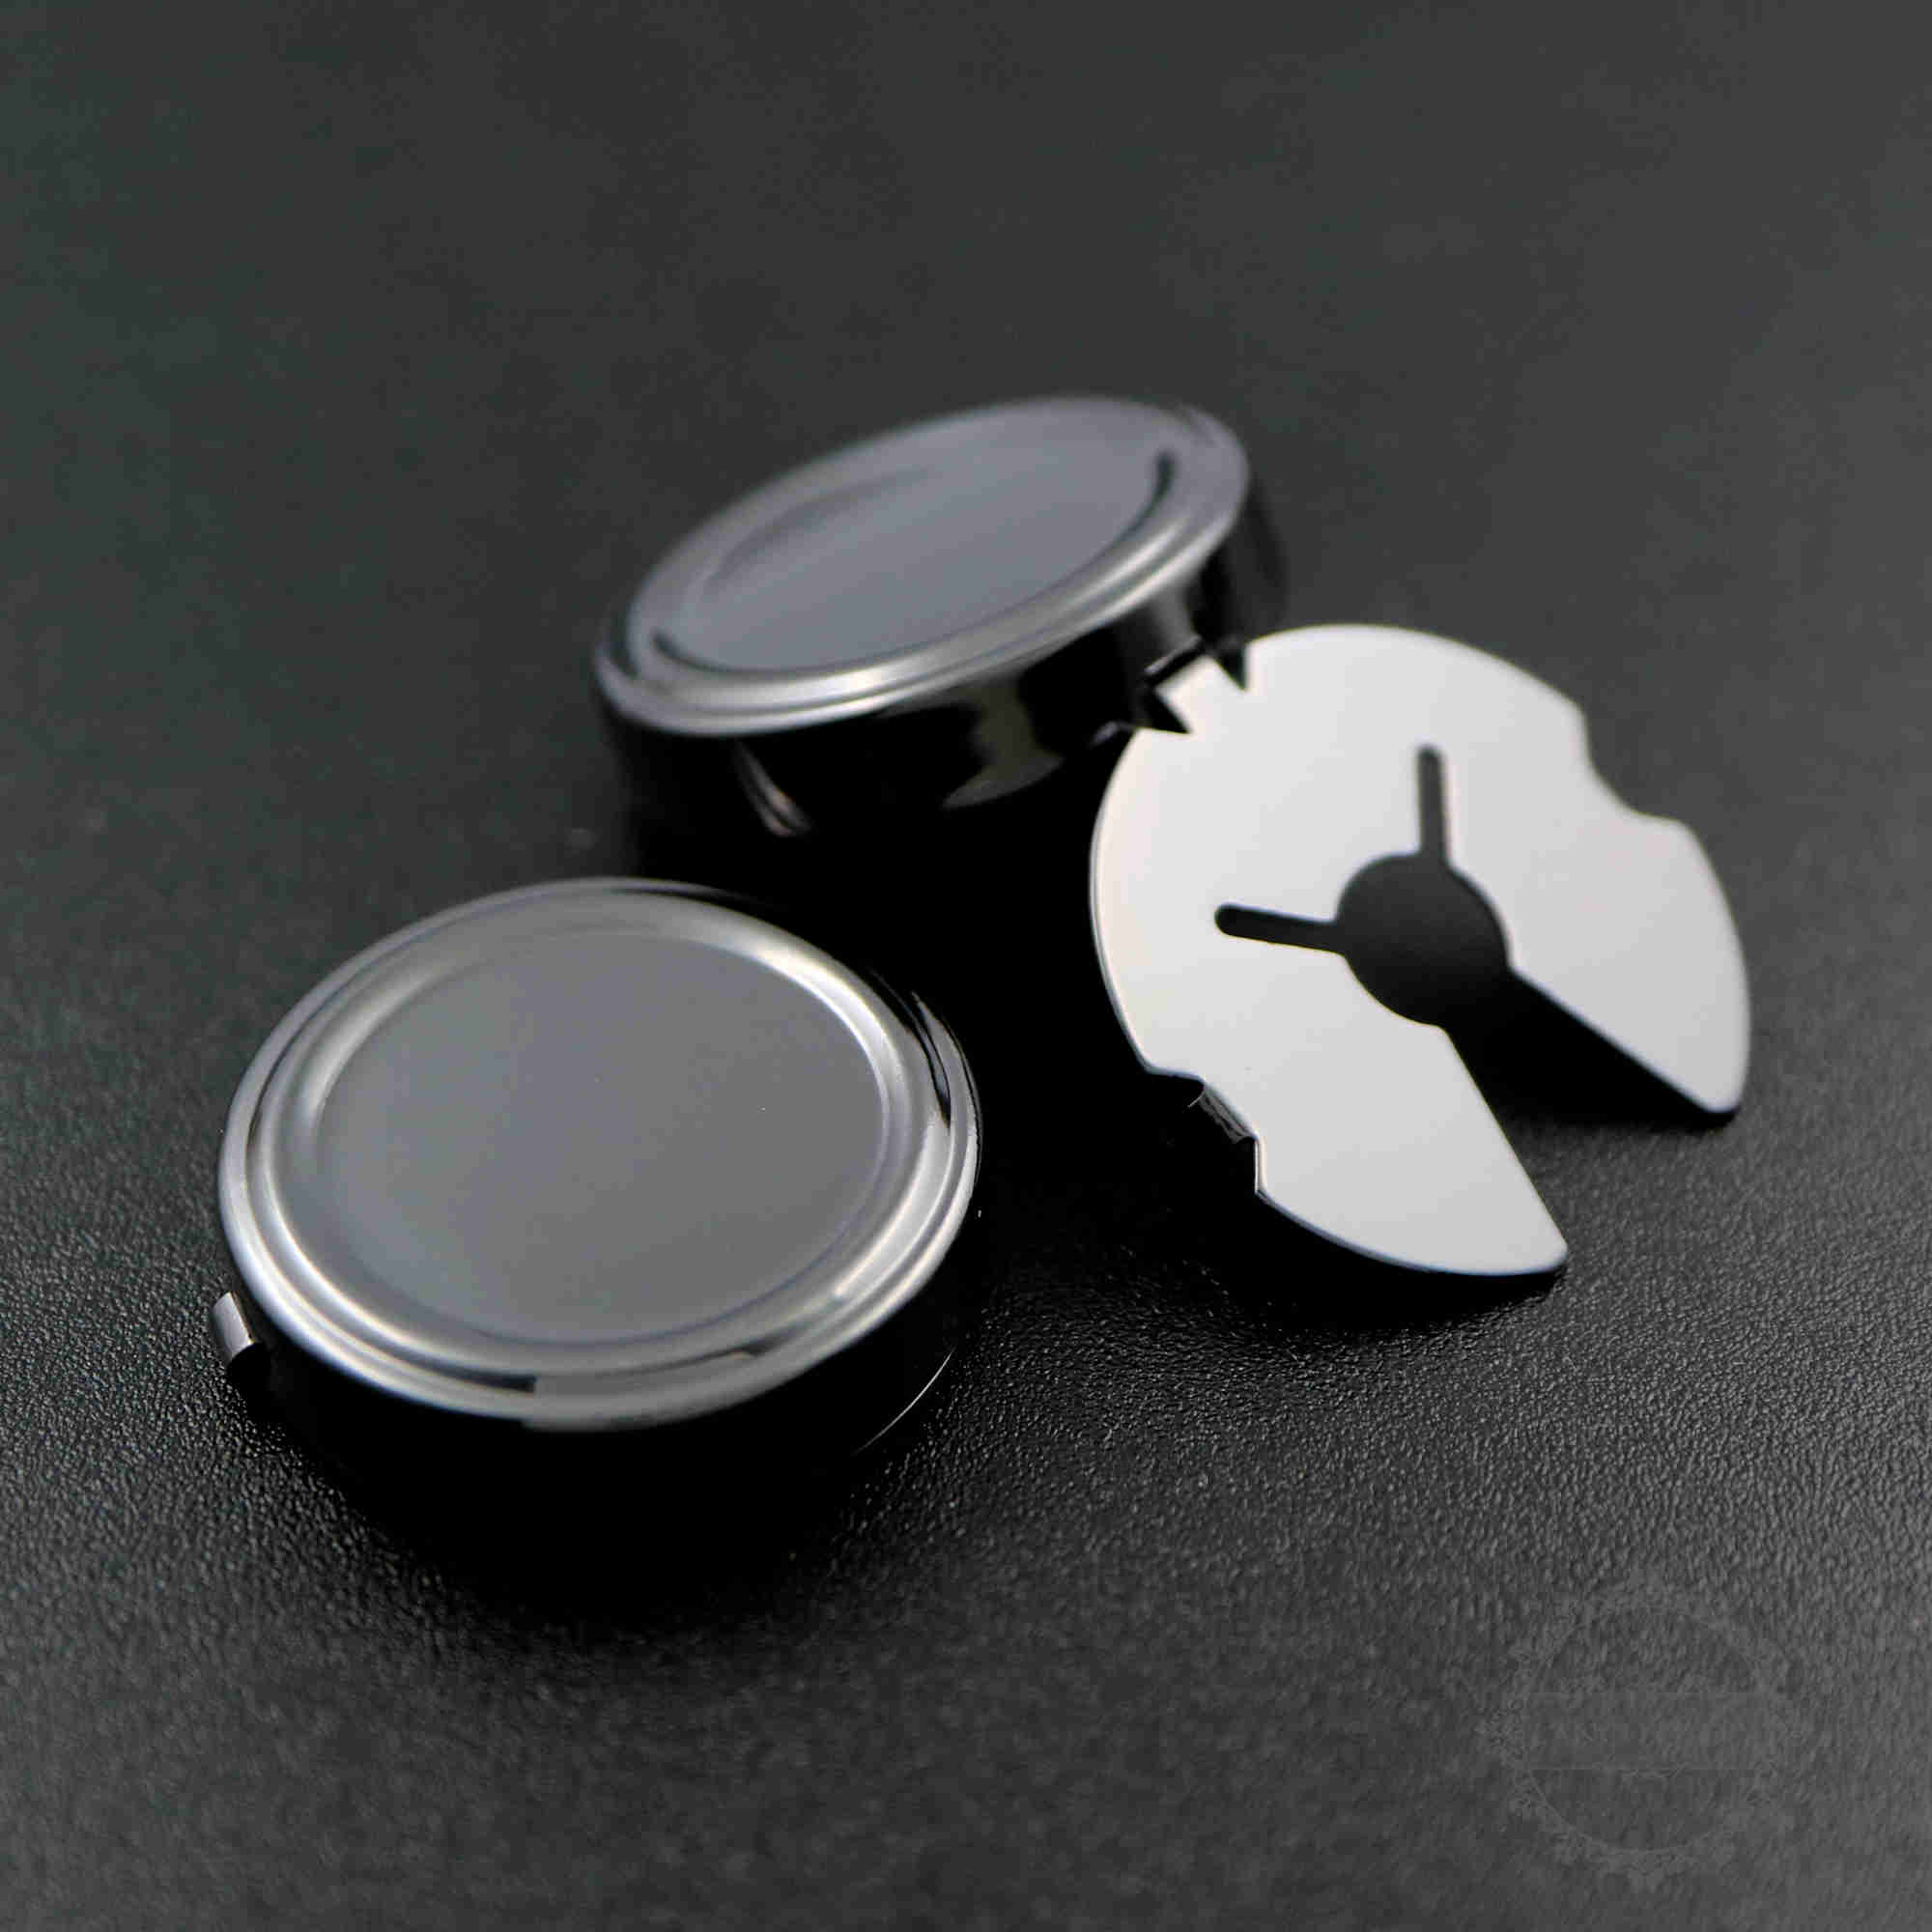 12Pcs 25MM Big Gun Black Round Cuff Button Cover Cuff Links For Wedding Formal Shirt - Click Image to Close